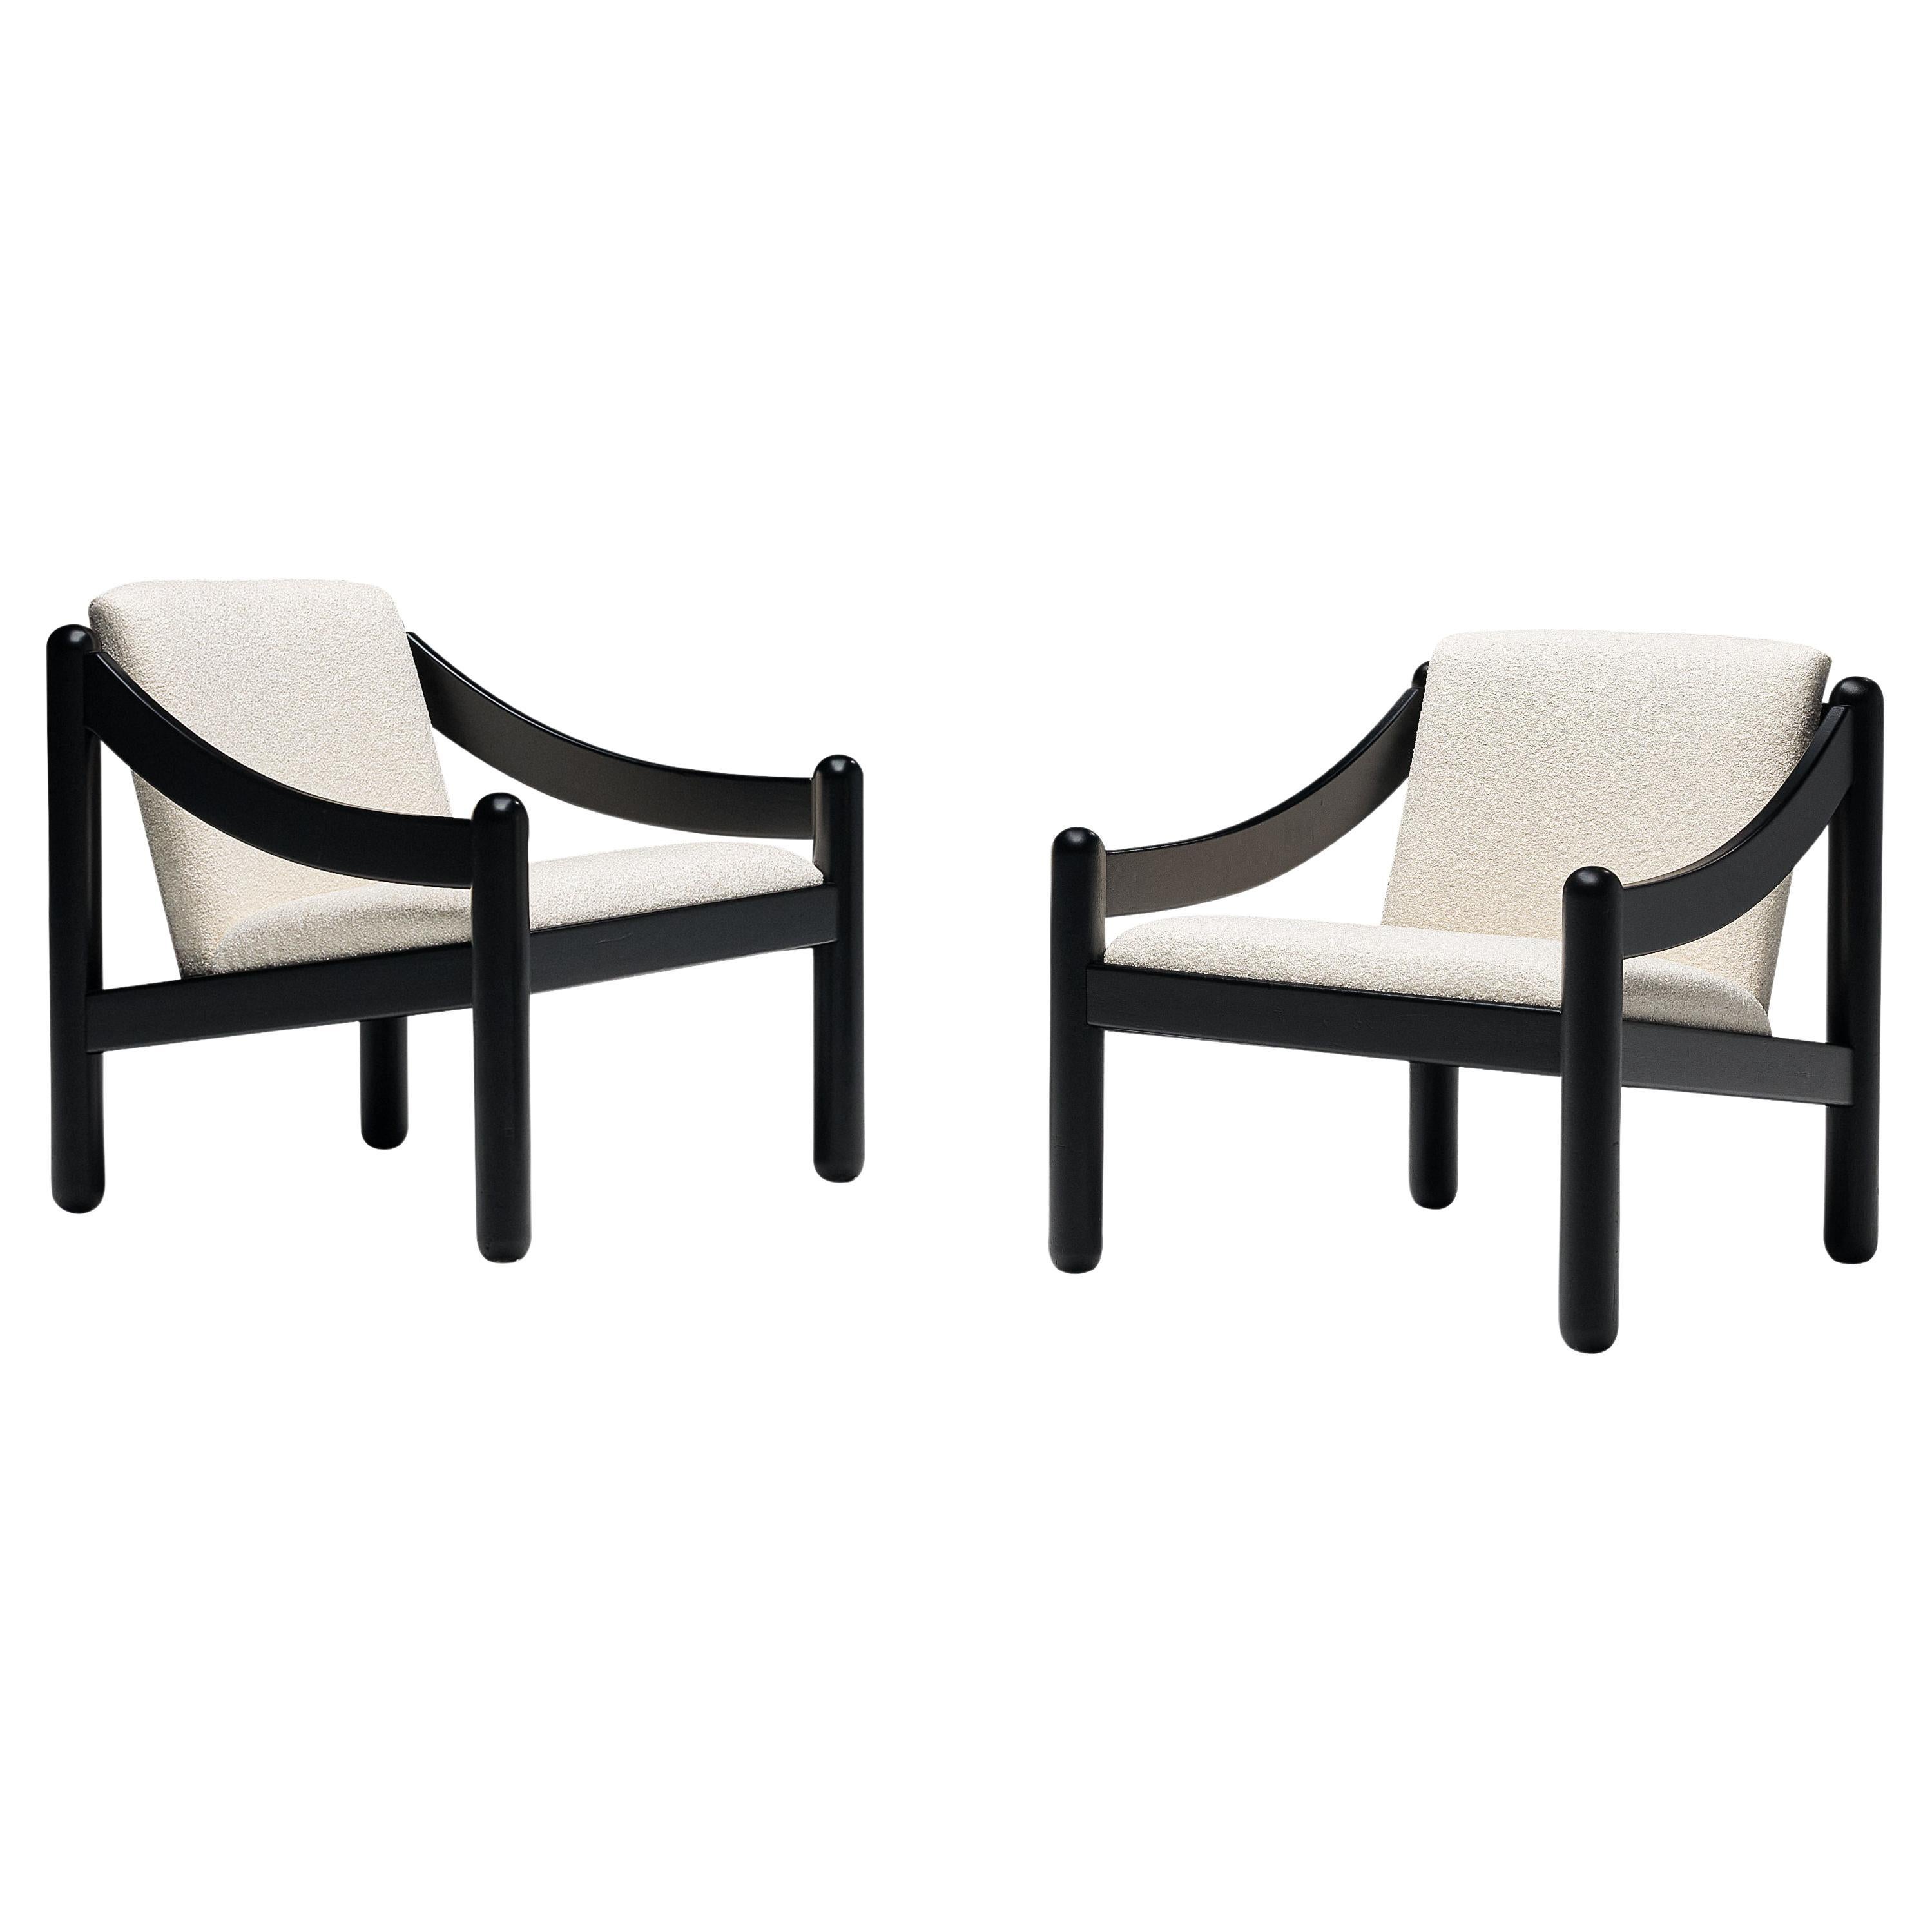 Vico Magistretti for Cassina Pair of ‘Carimate’ Lounge Chairs